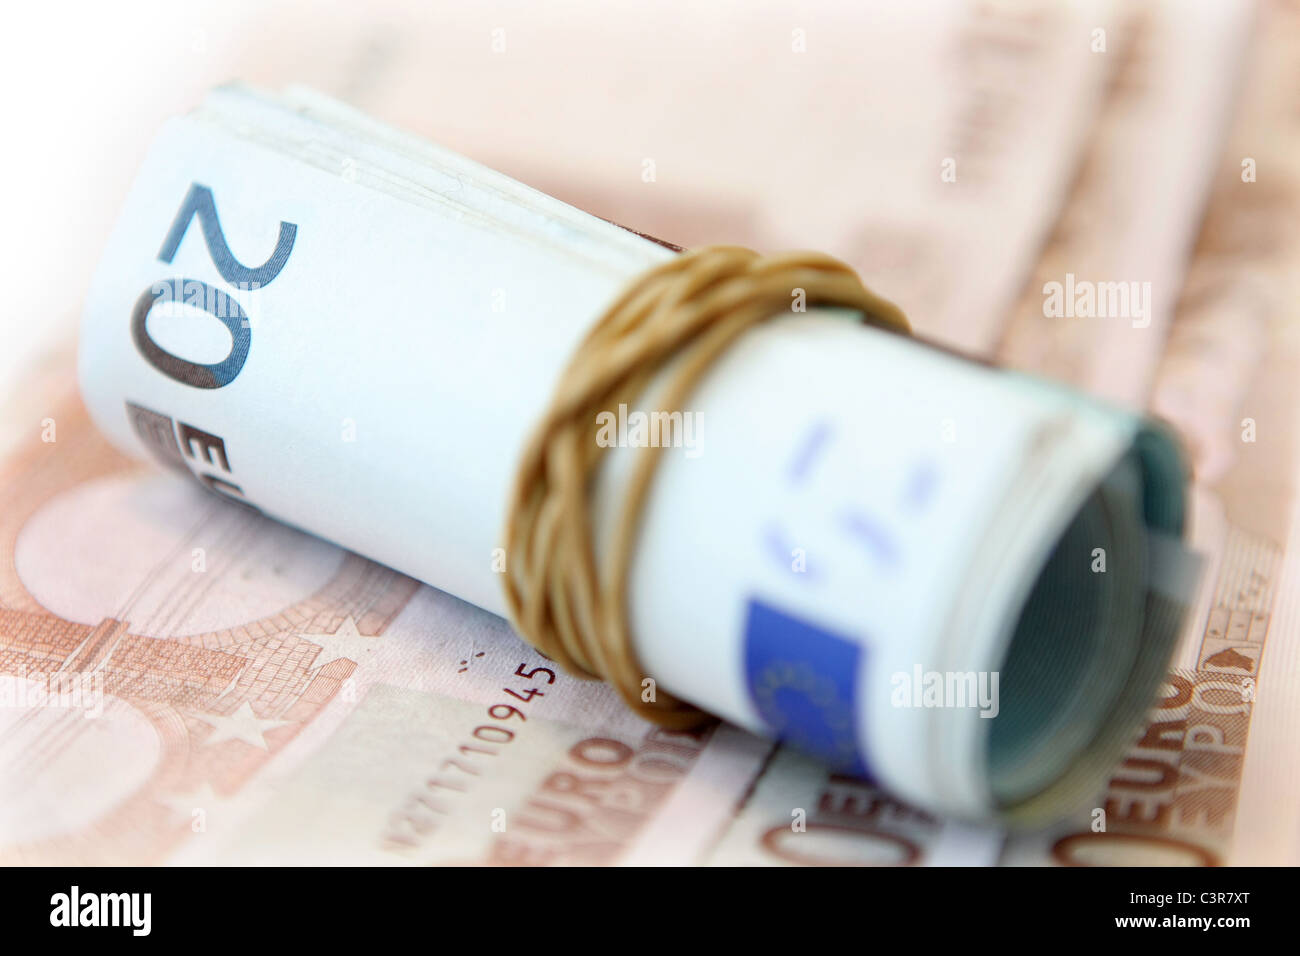 rolled up 20 euro notes in an elastic band on out of focus 10 euro notes Stock Photo